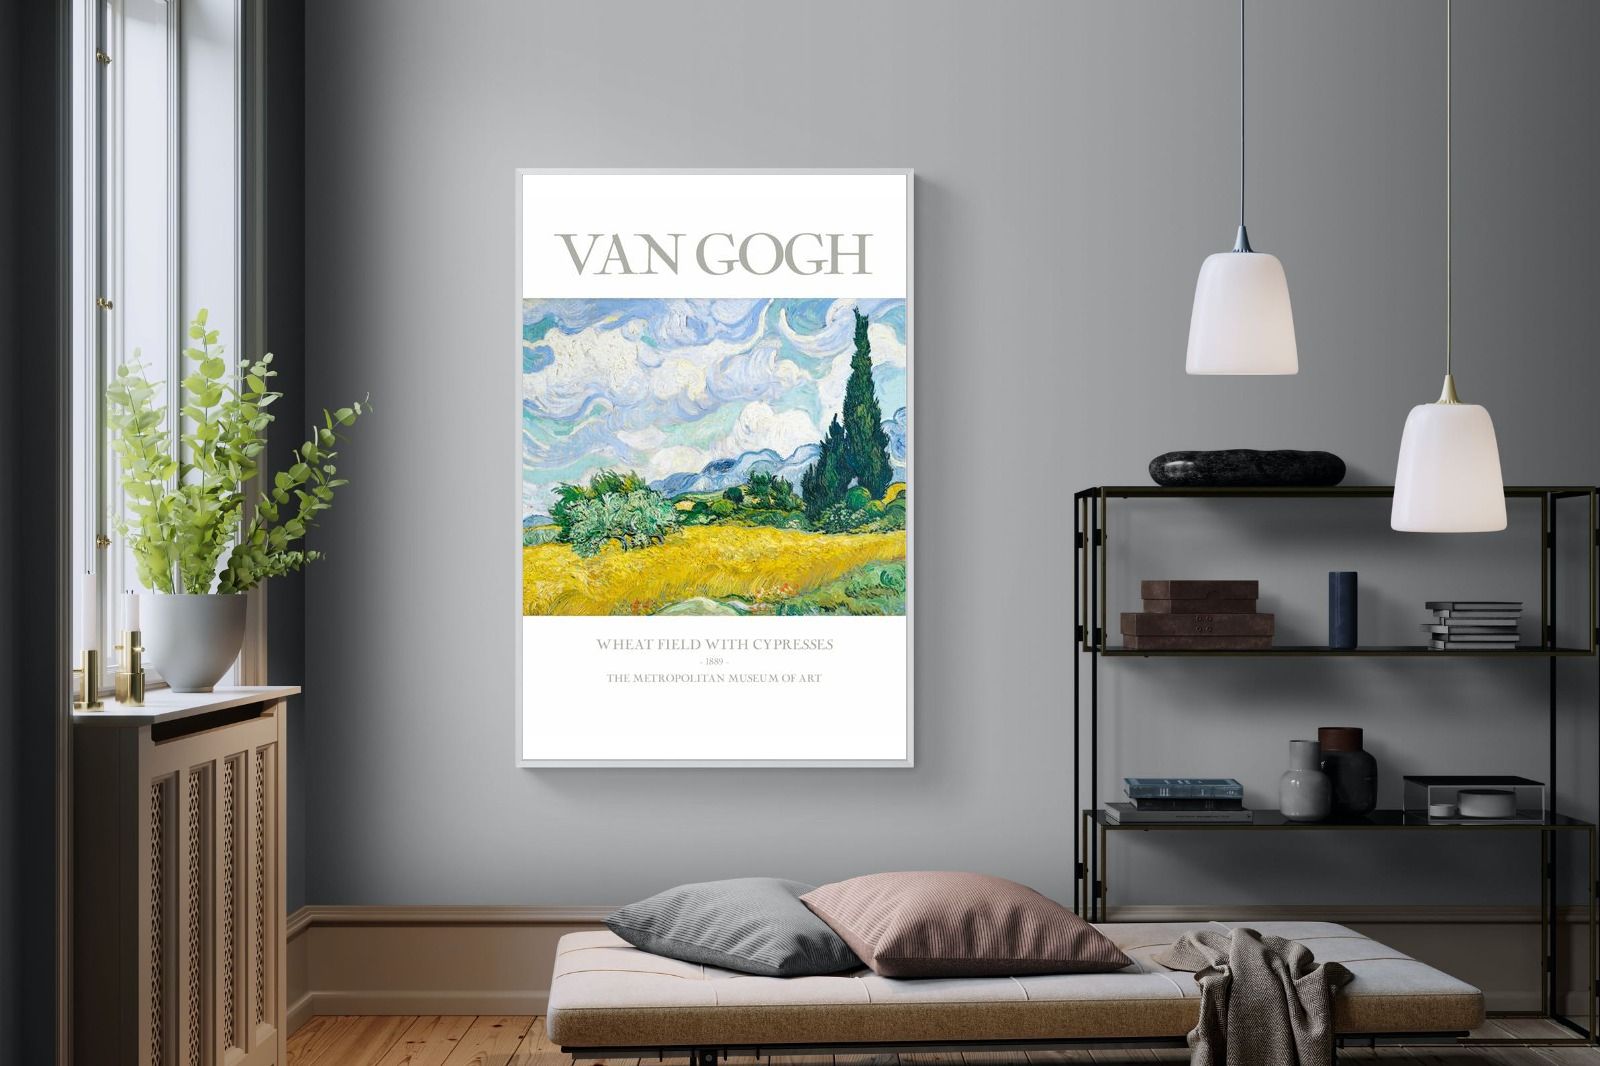 Pixalot Wheat Field With Cypresses Exhibition Poster